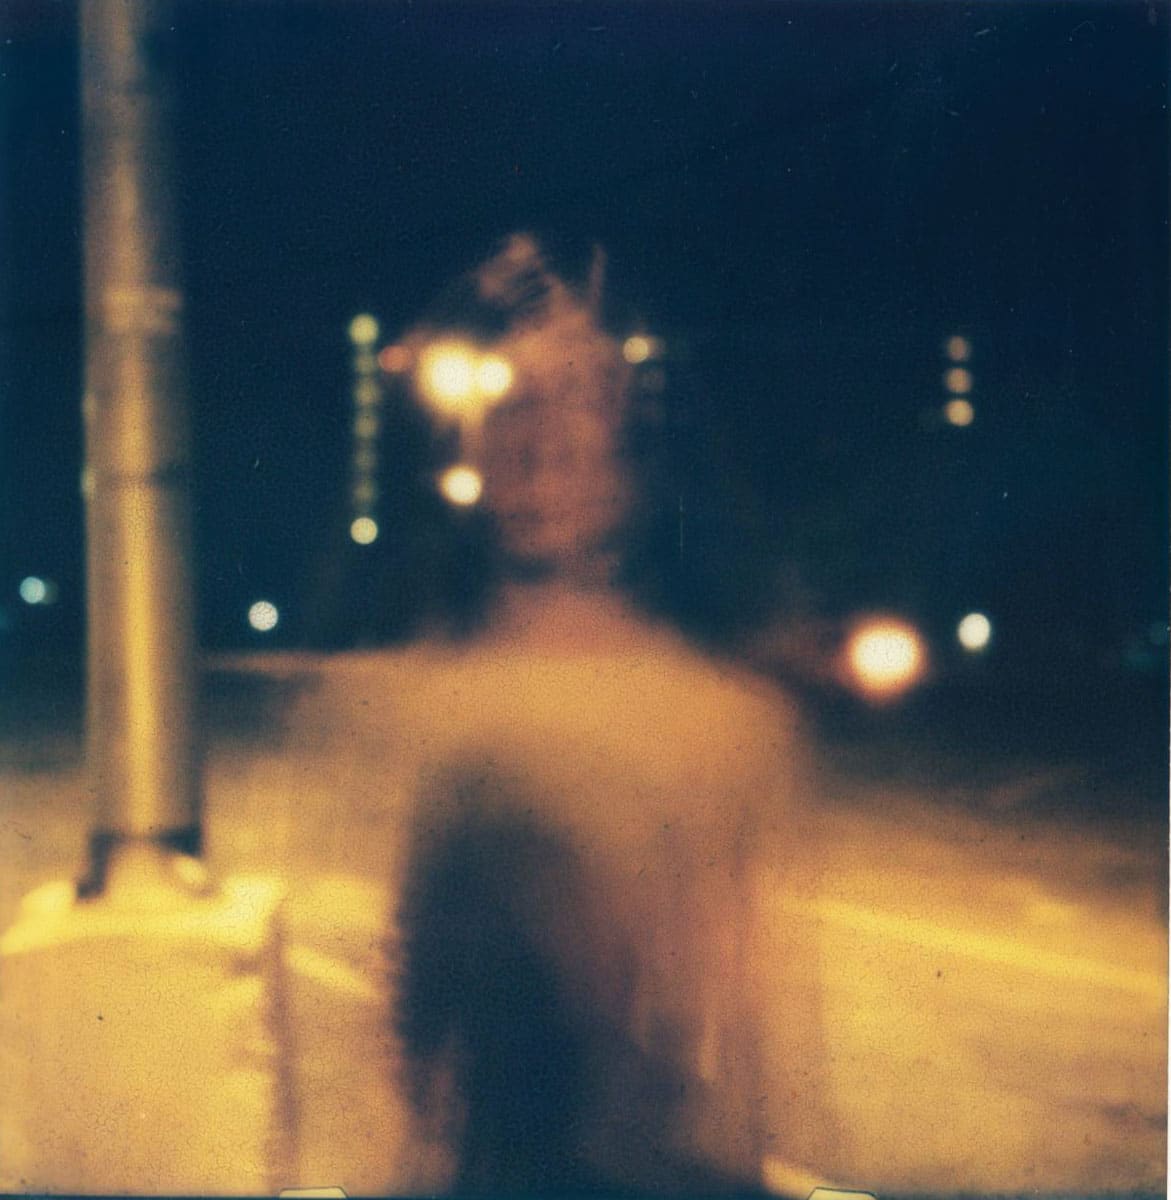 Apparitions - Polaroid SX-70 and Impossible Project Film